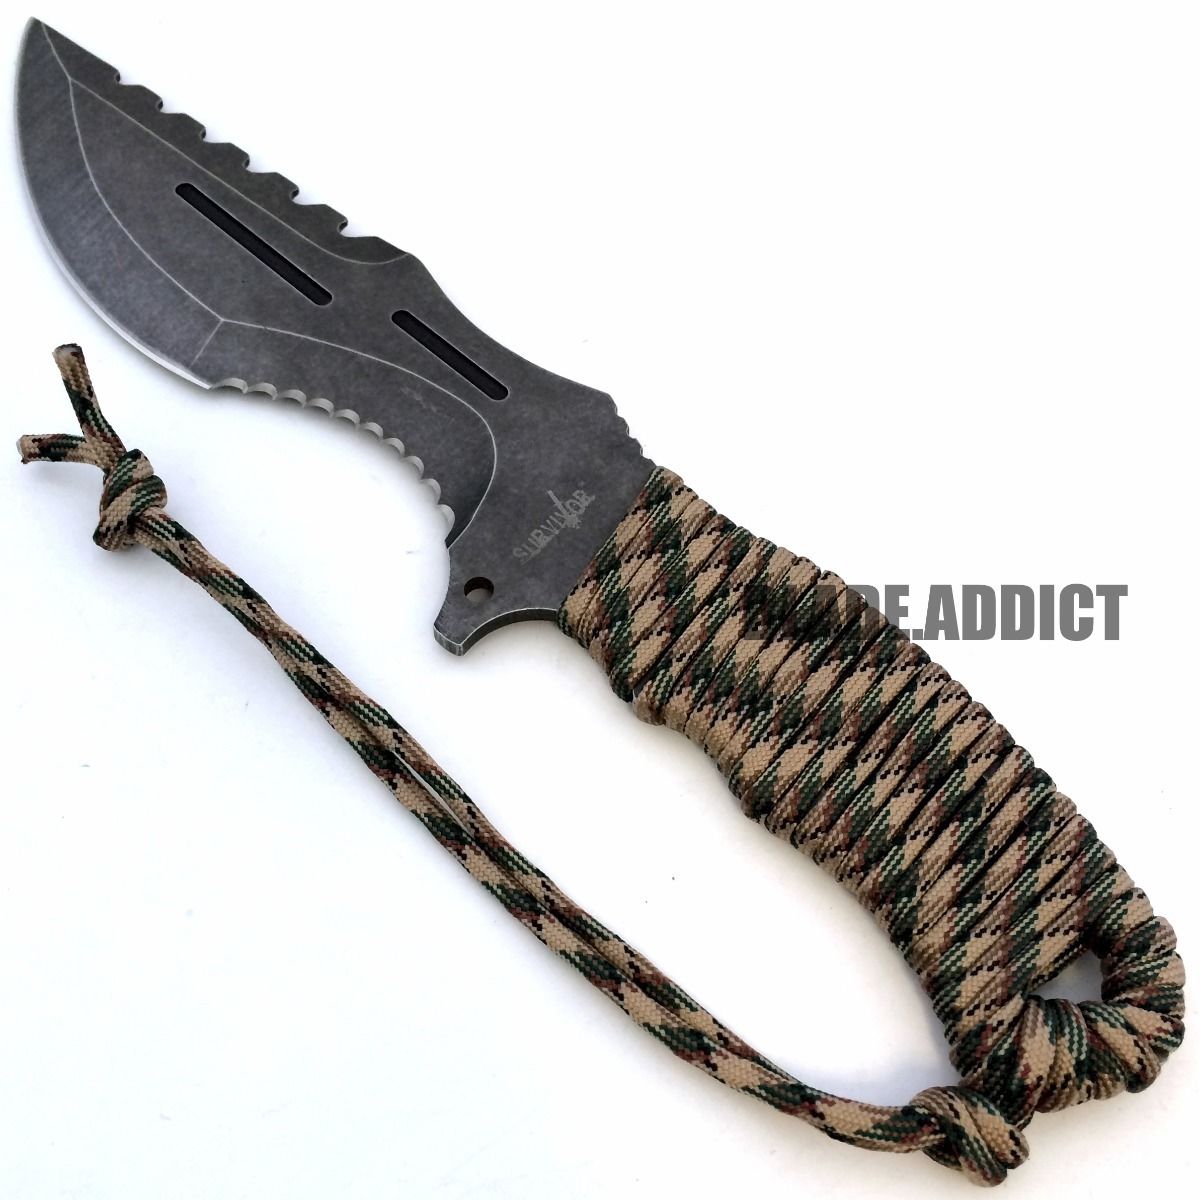 12" STONEWASH TACTICAL SURVIVAL RAMBO FULL TANG FIXED BLADE KNIFE HUNTING BOWIE